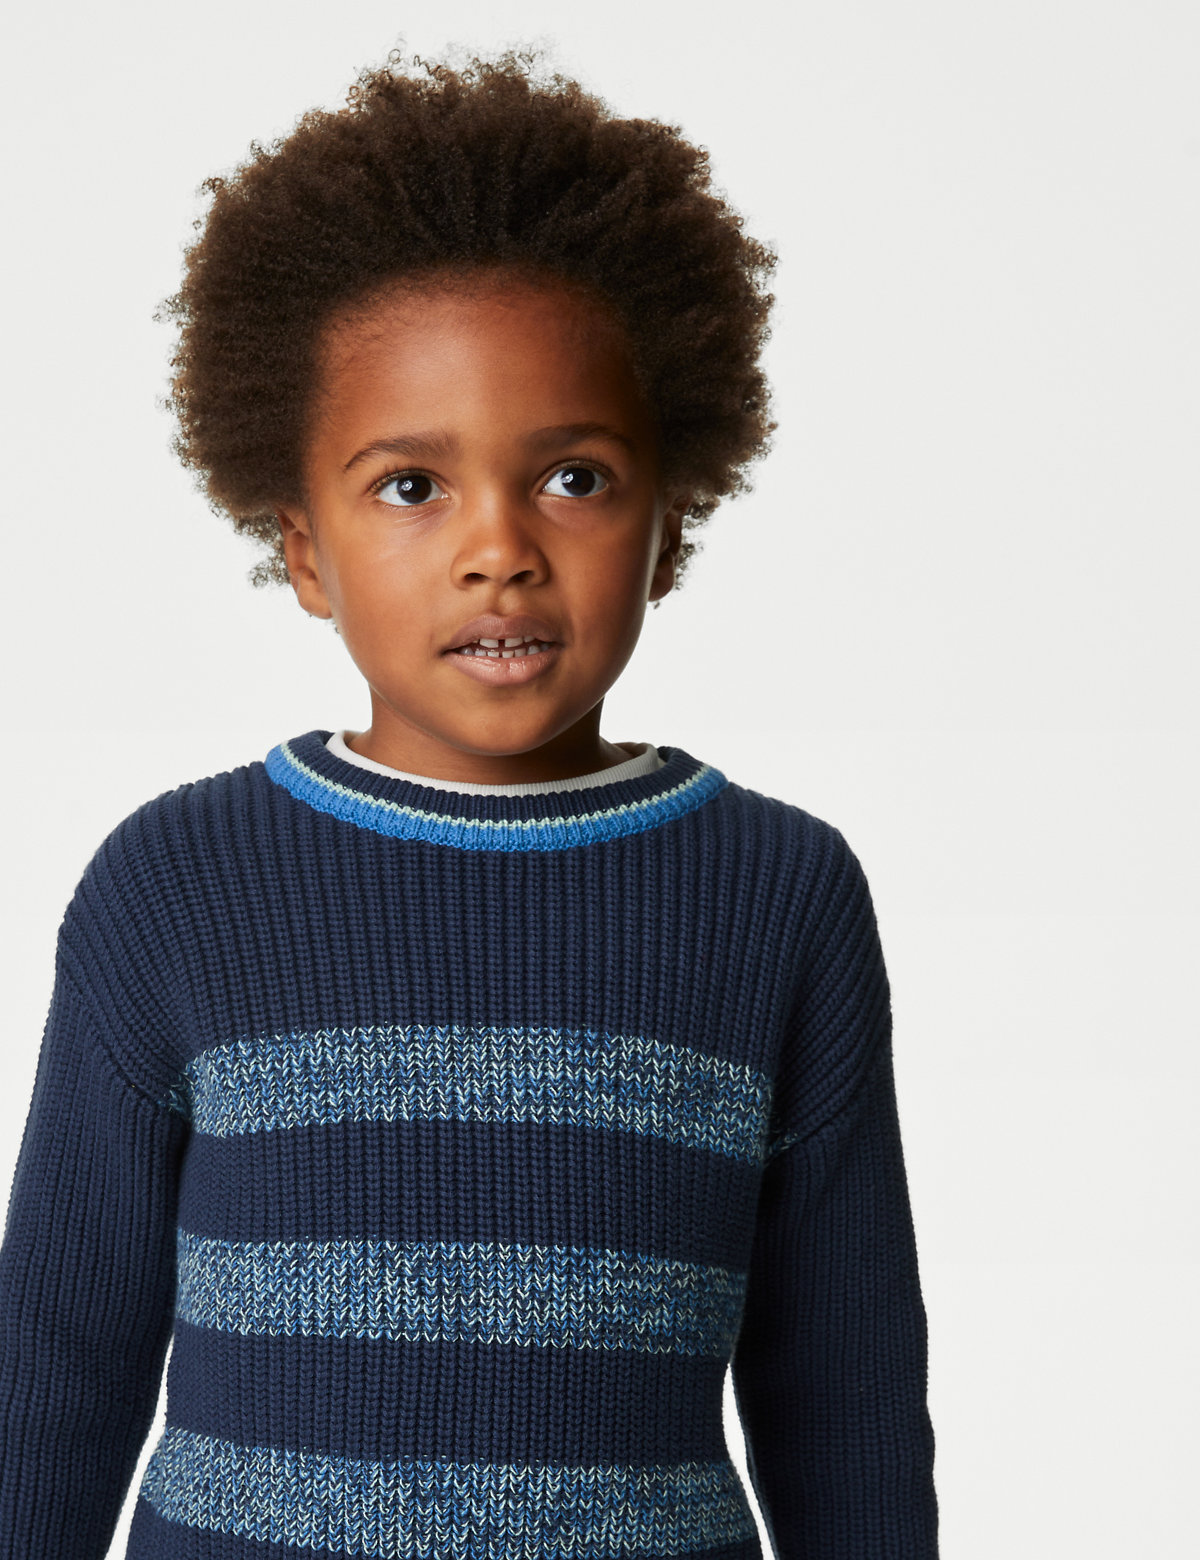 Pure Cotton Striped Knitted Jumper (2-8 Yrs)